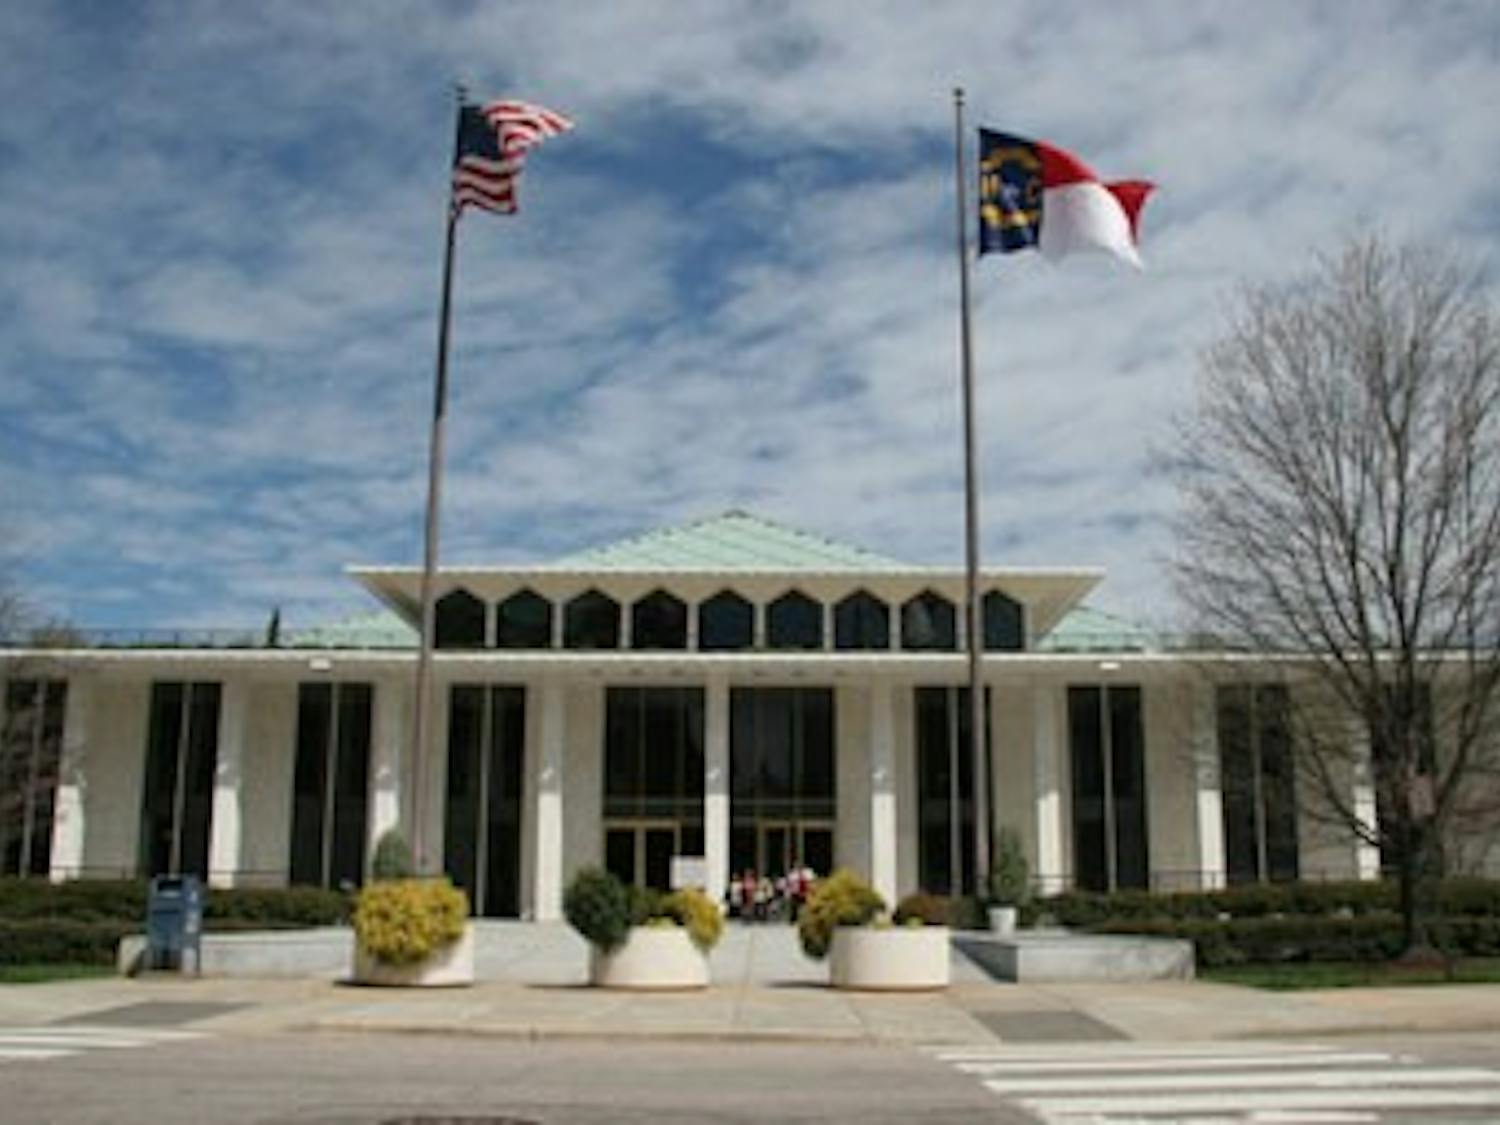 The Legislative Building located in Raleigh houses North Carolina's General Assembly.&nbsp;